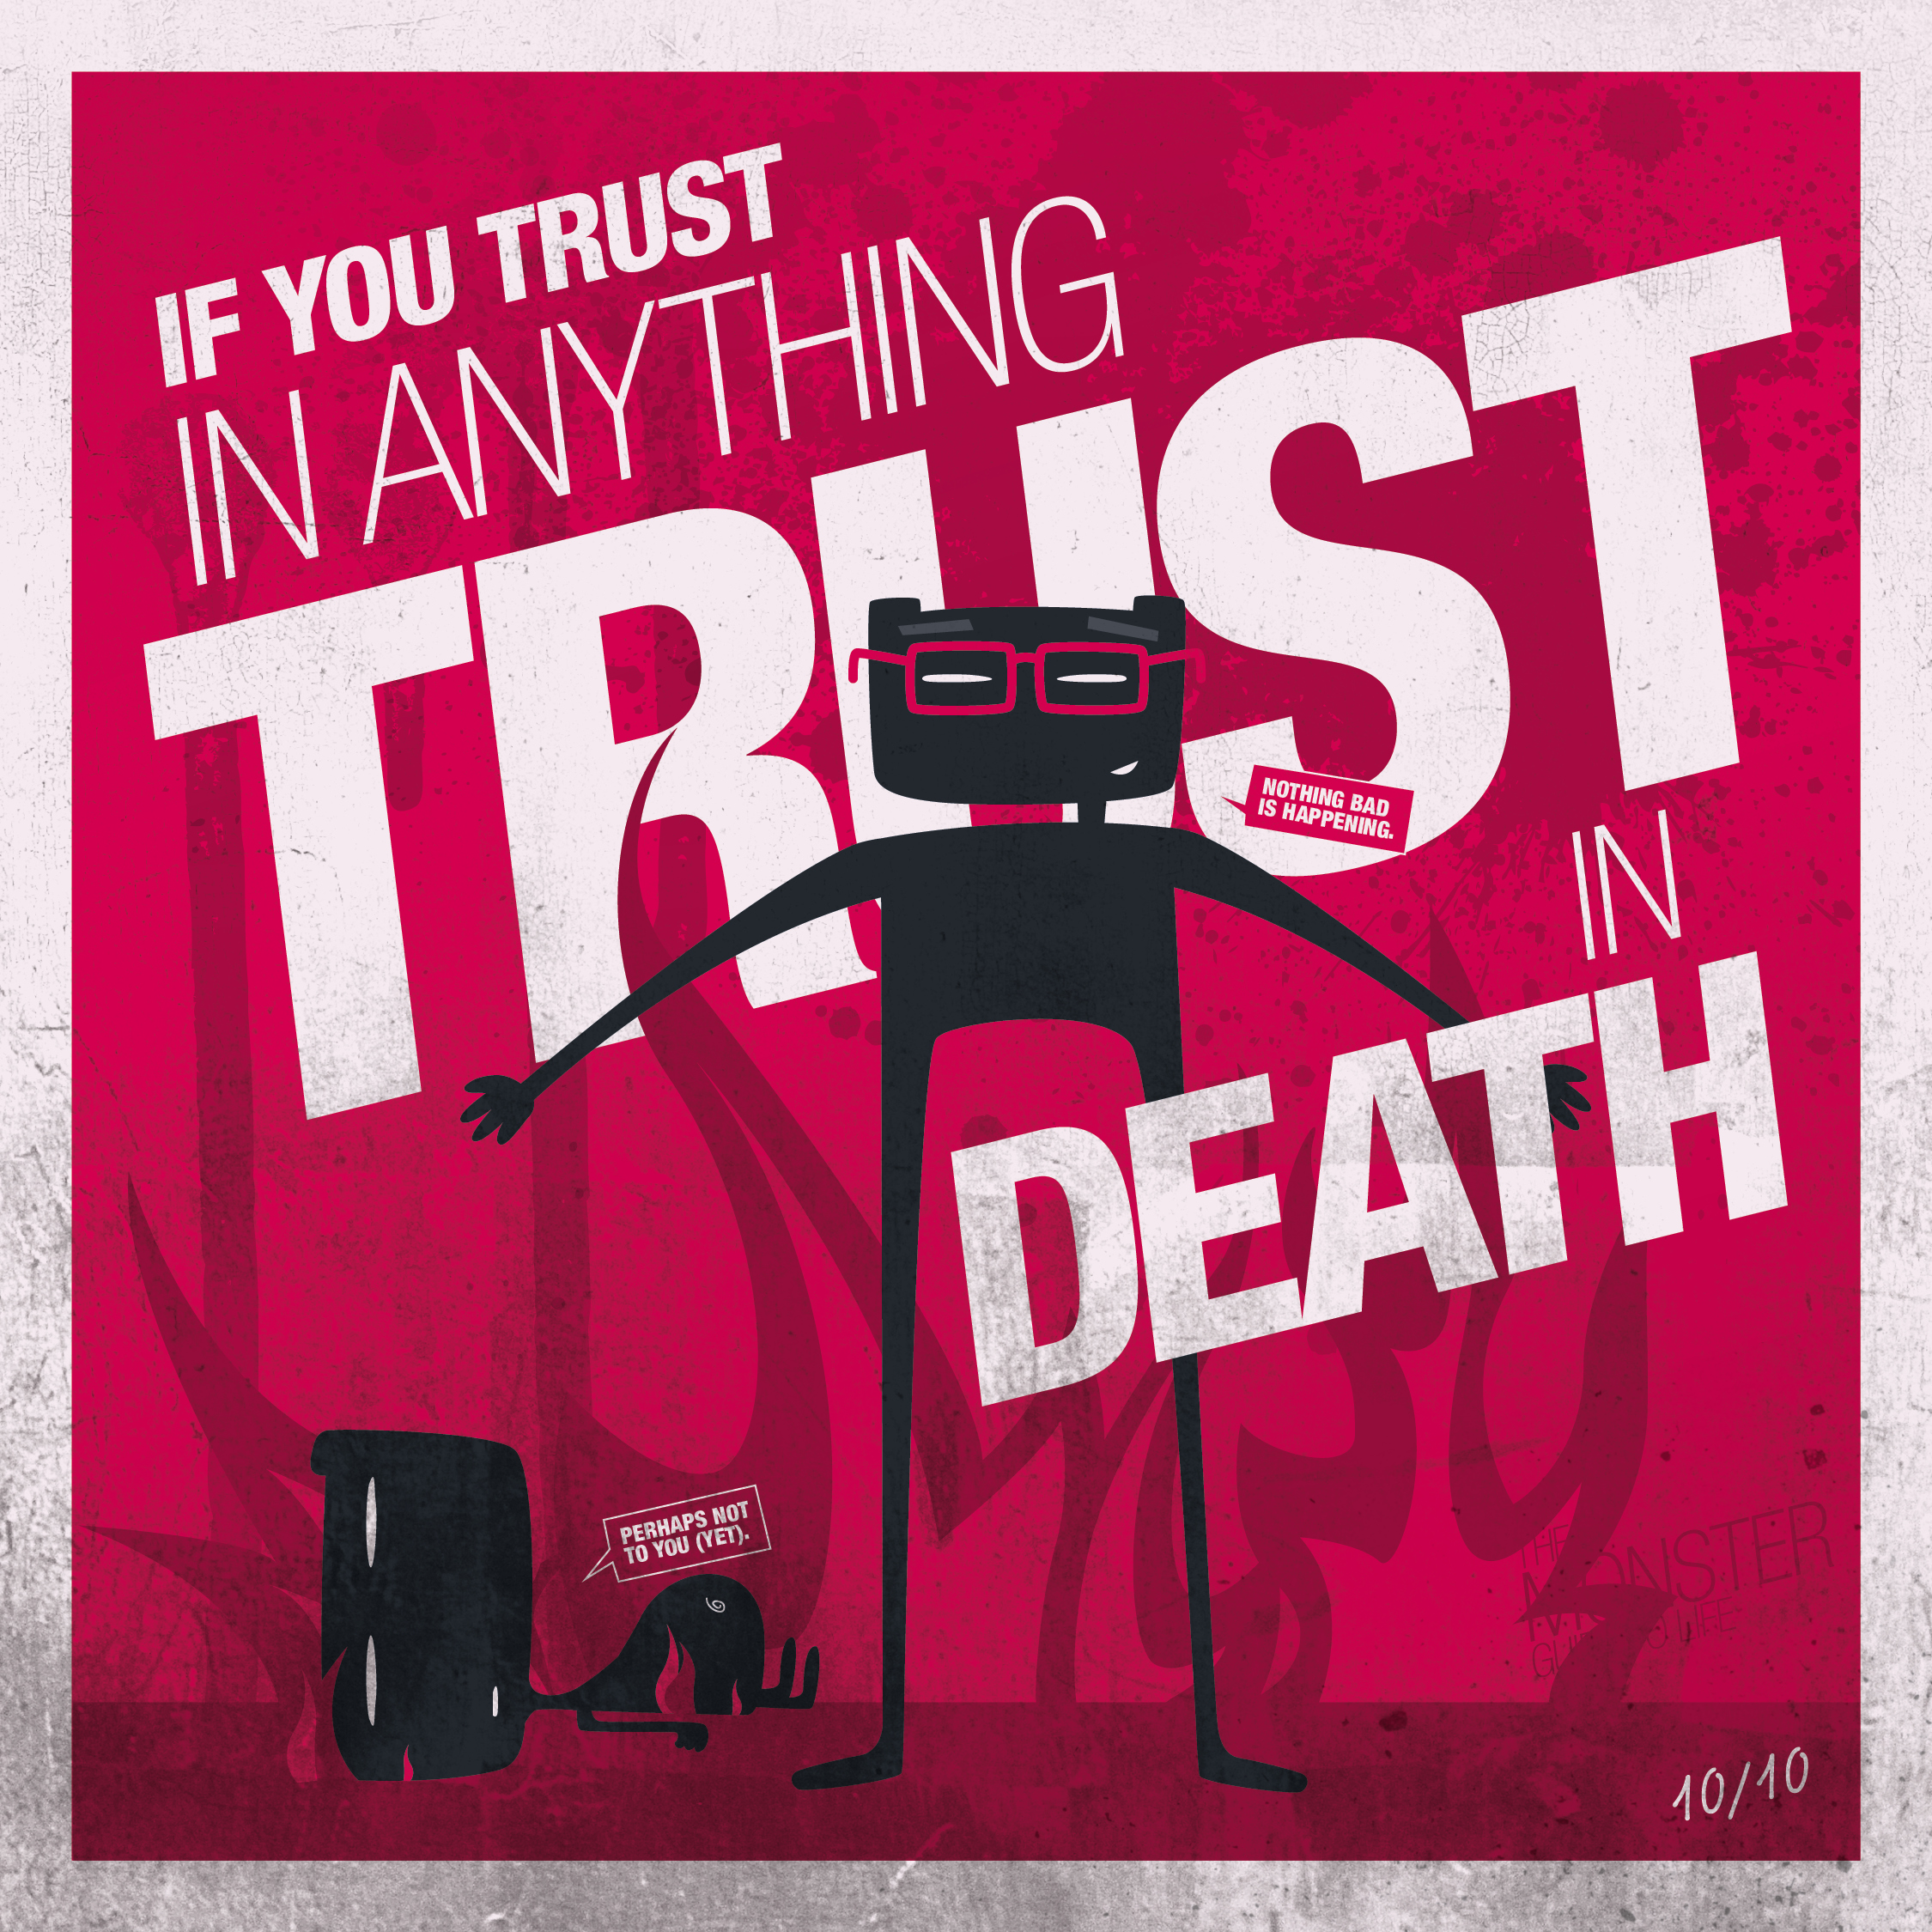 If you trust in anything, trust in death